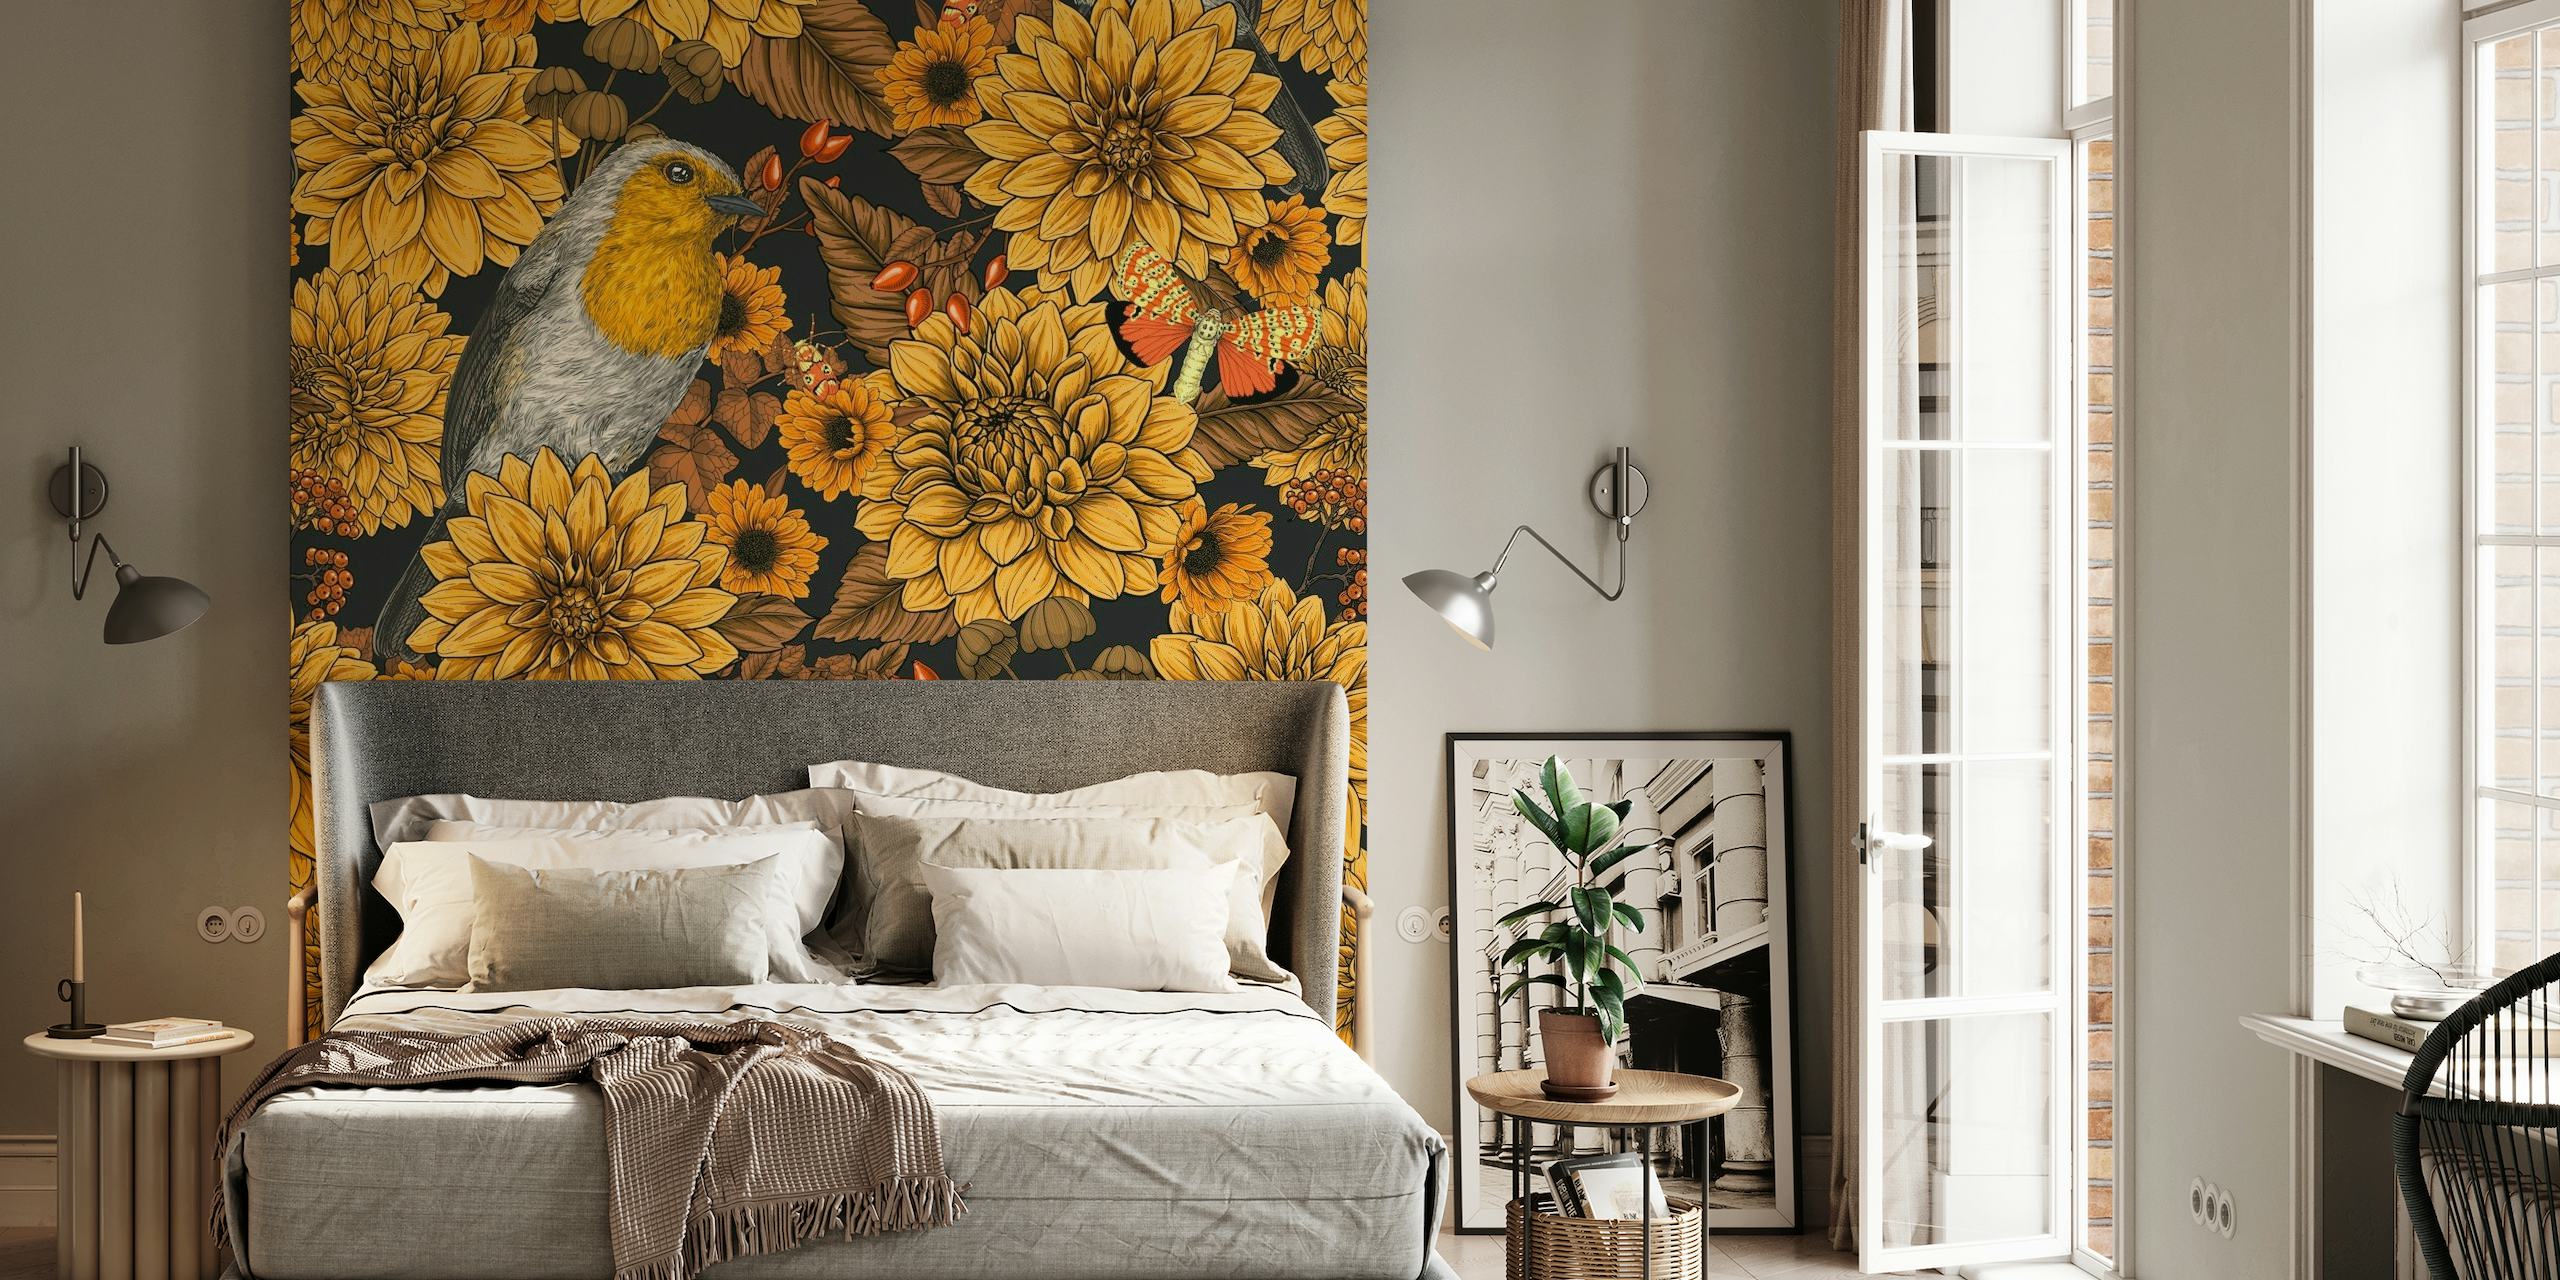 A wall mural with robins among golden chrysanthemums on a dark background, evoking a garden at dusk.